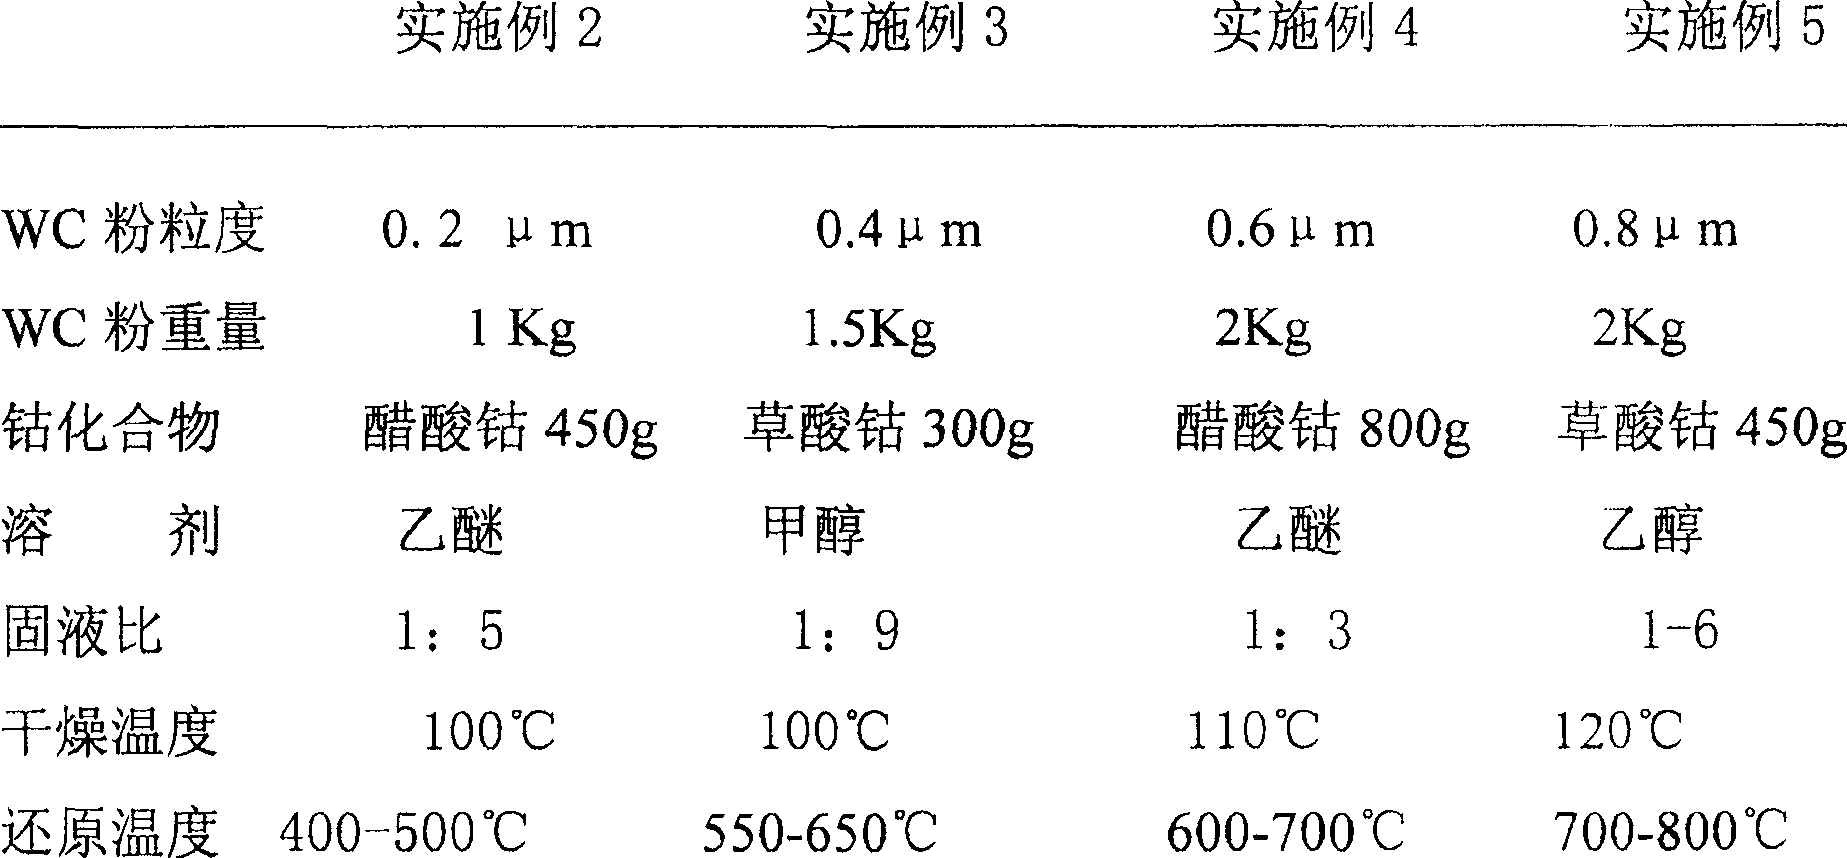 Method of preparing ultra-fine hard alloy mixture of tungsten and cobalt and product